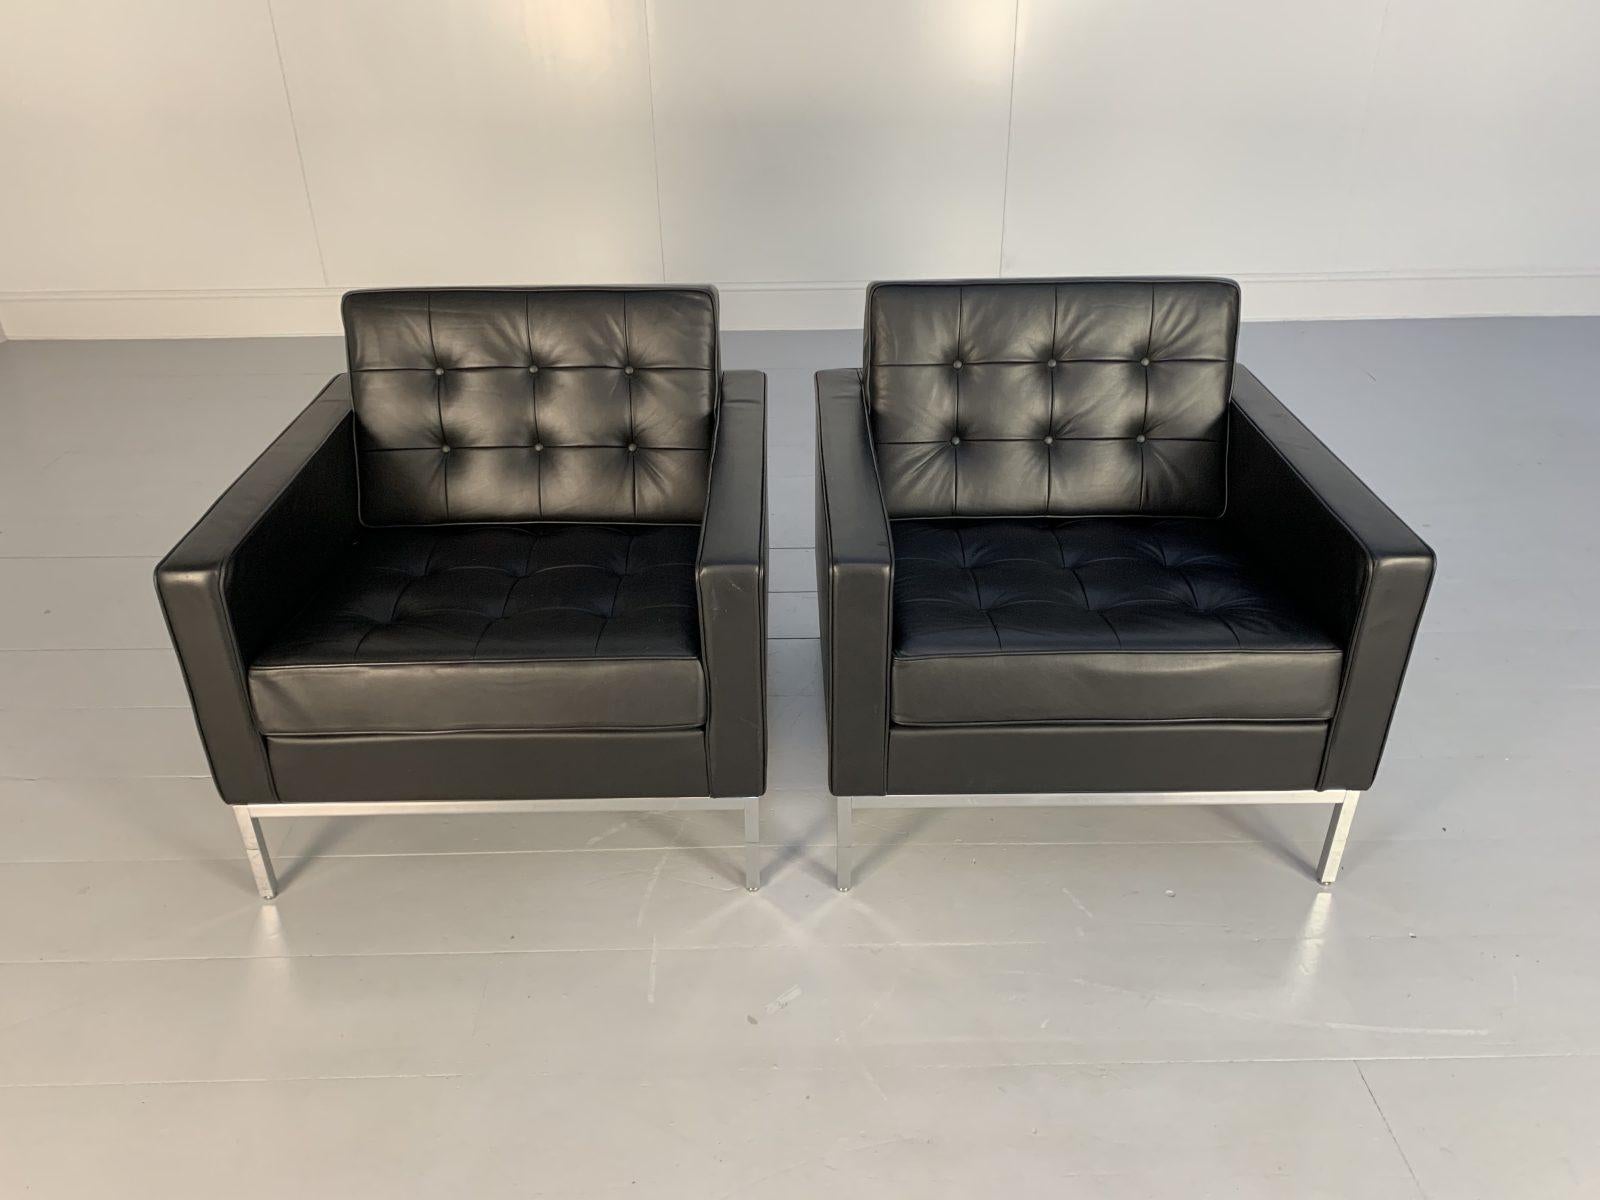 Pair of Knoll Studio “Florence Knoll” Lounge Armchairs In Black “Volo” Leather In Good Condition For Sale In Barrowford, GB